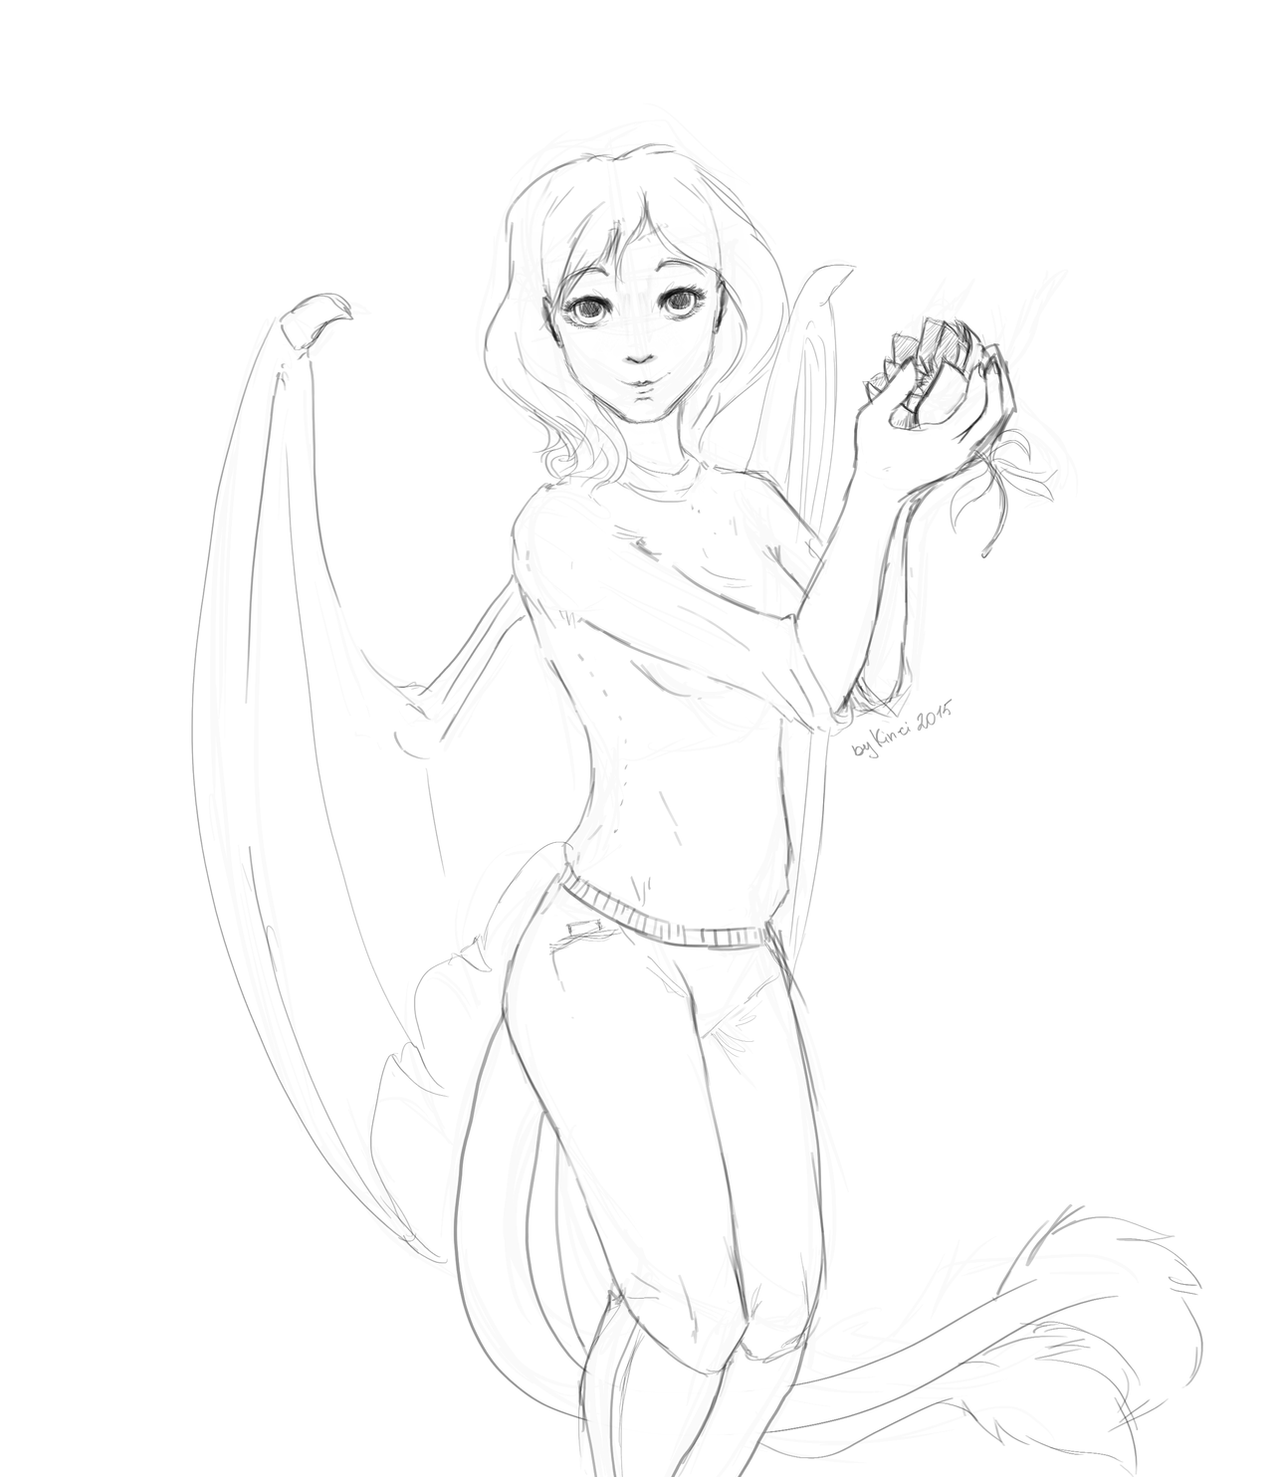 sketch_girl_with_dragon_wings__critique_needed__by_badpeople-d9299yx.png